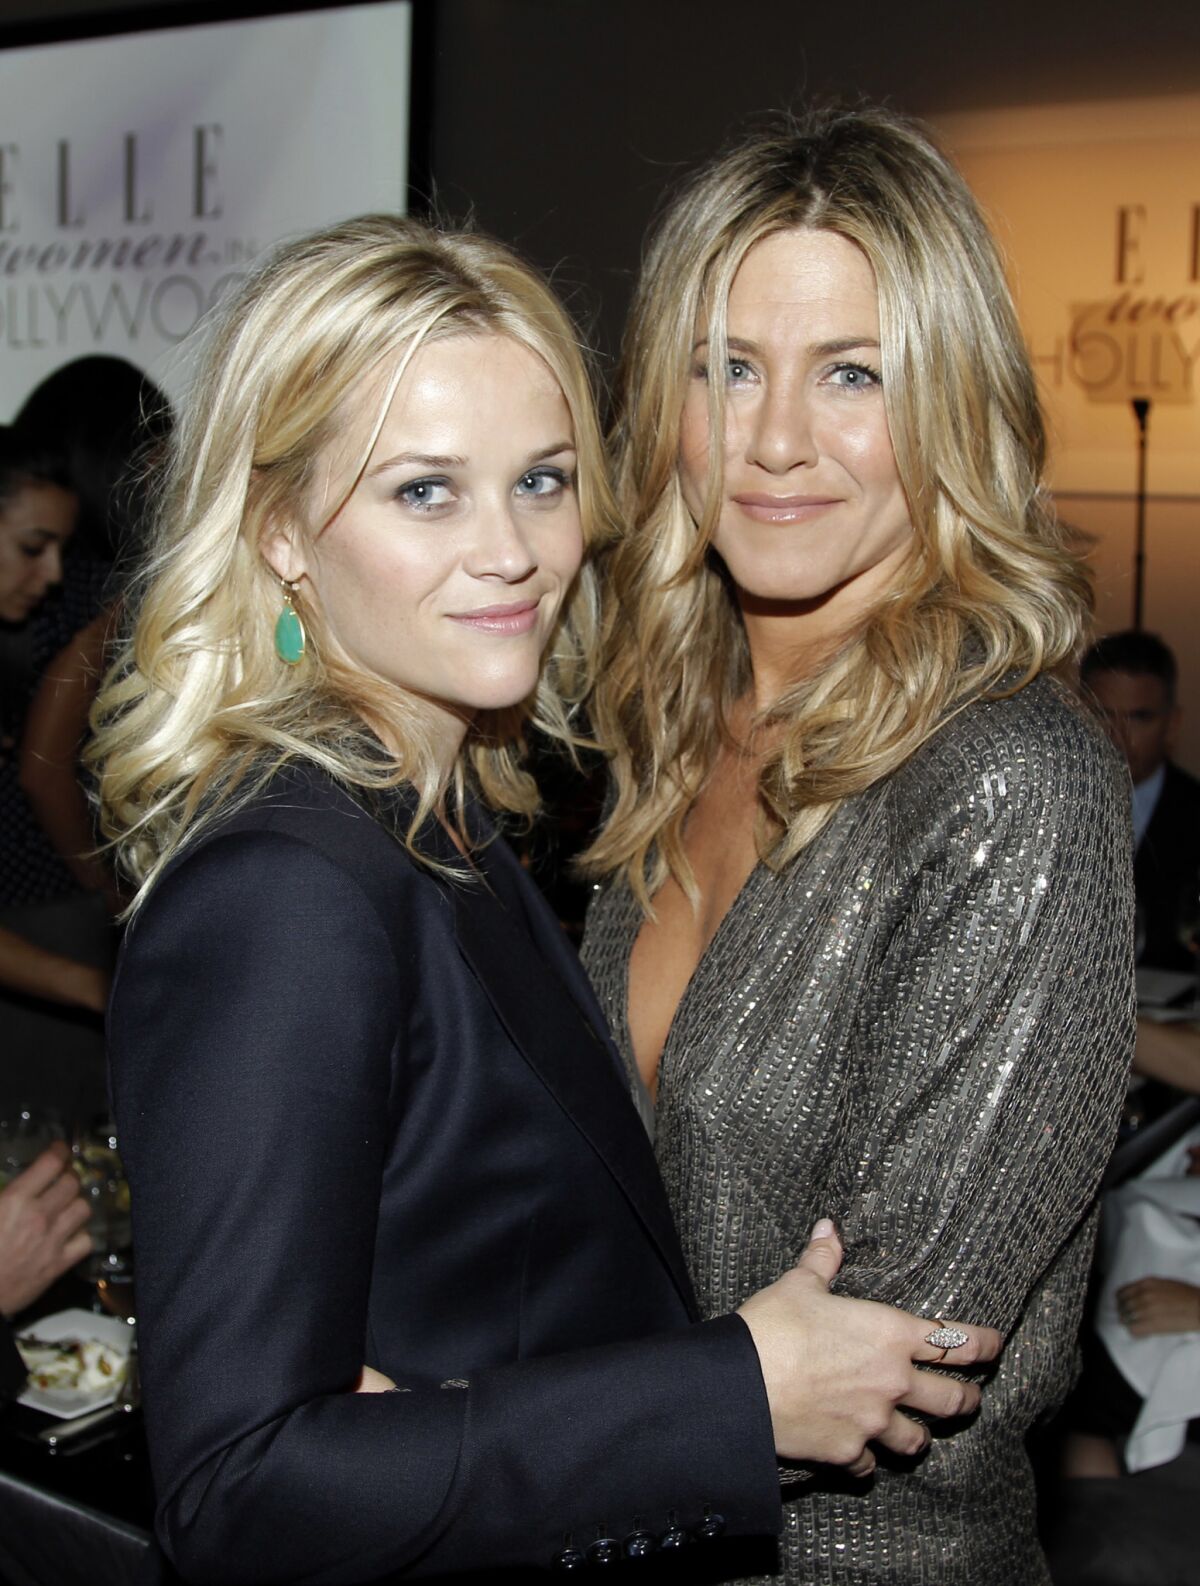 Jennifer Aniston, right, and Reese Witherspoon at the 18th Elle Women in Hollywood celebration in 2011. The two now star in the new Apple TV+ series "The Morning Show."